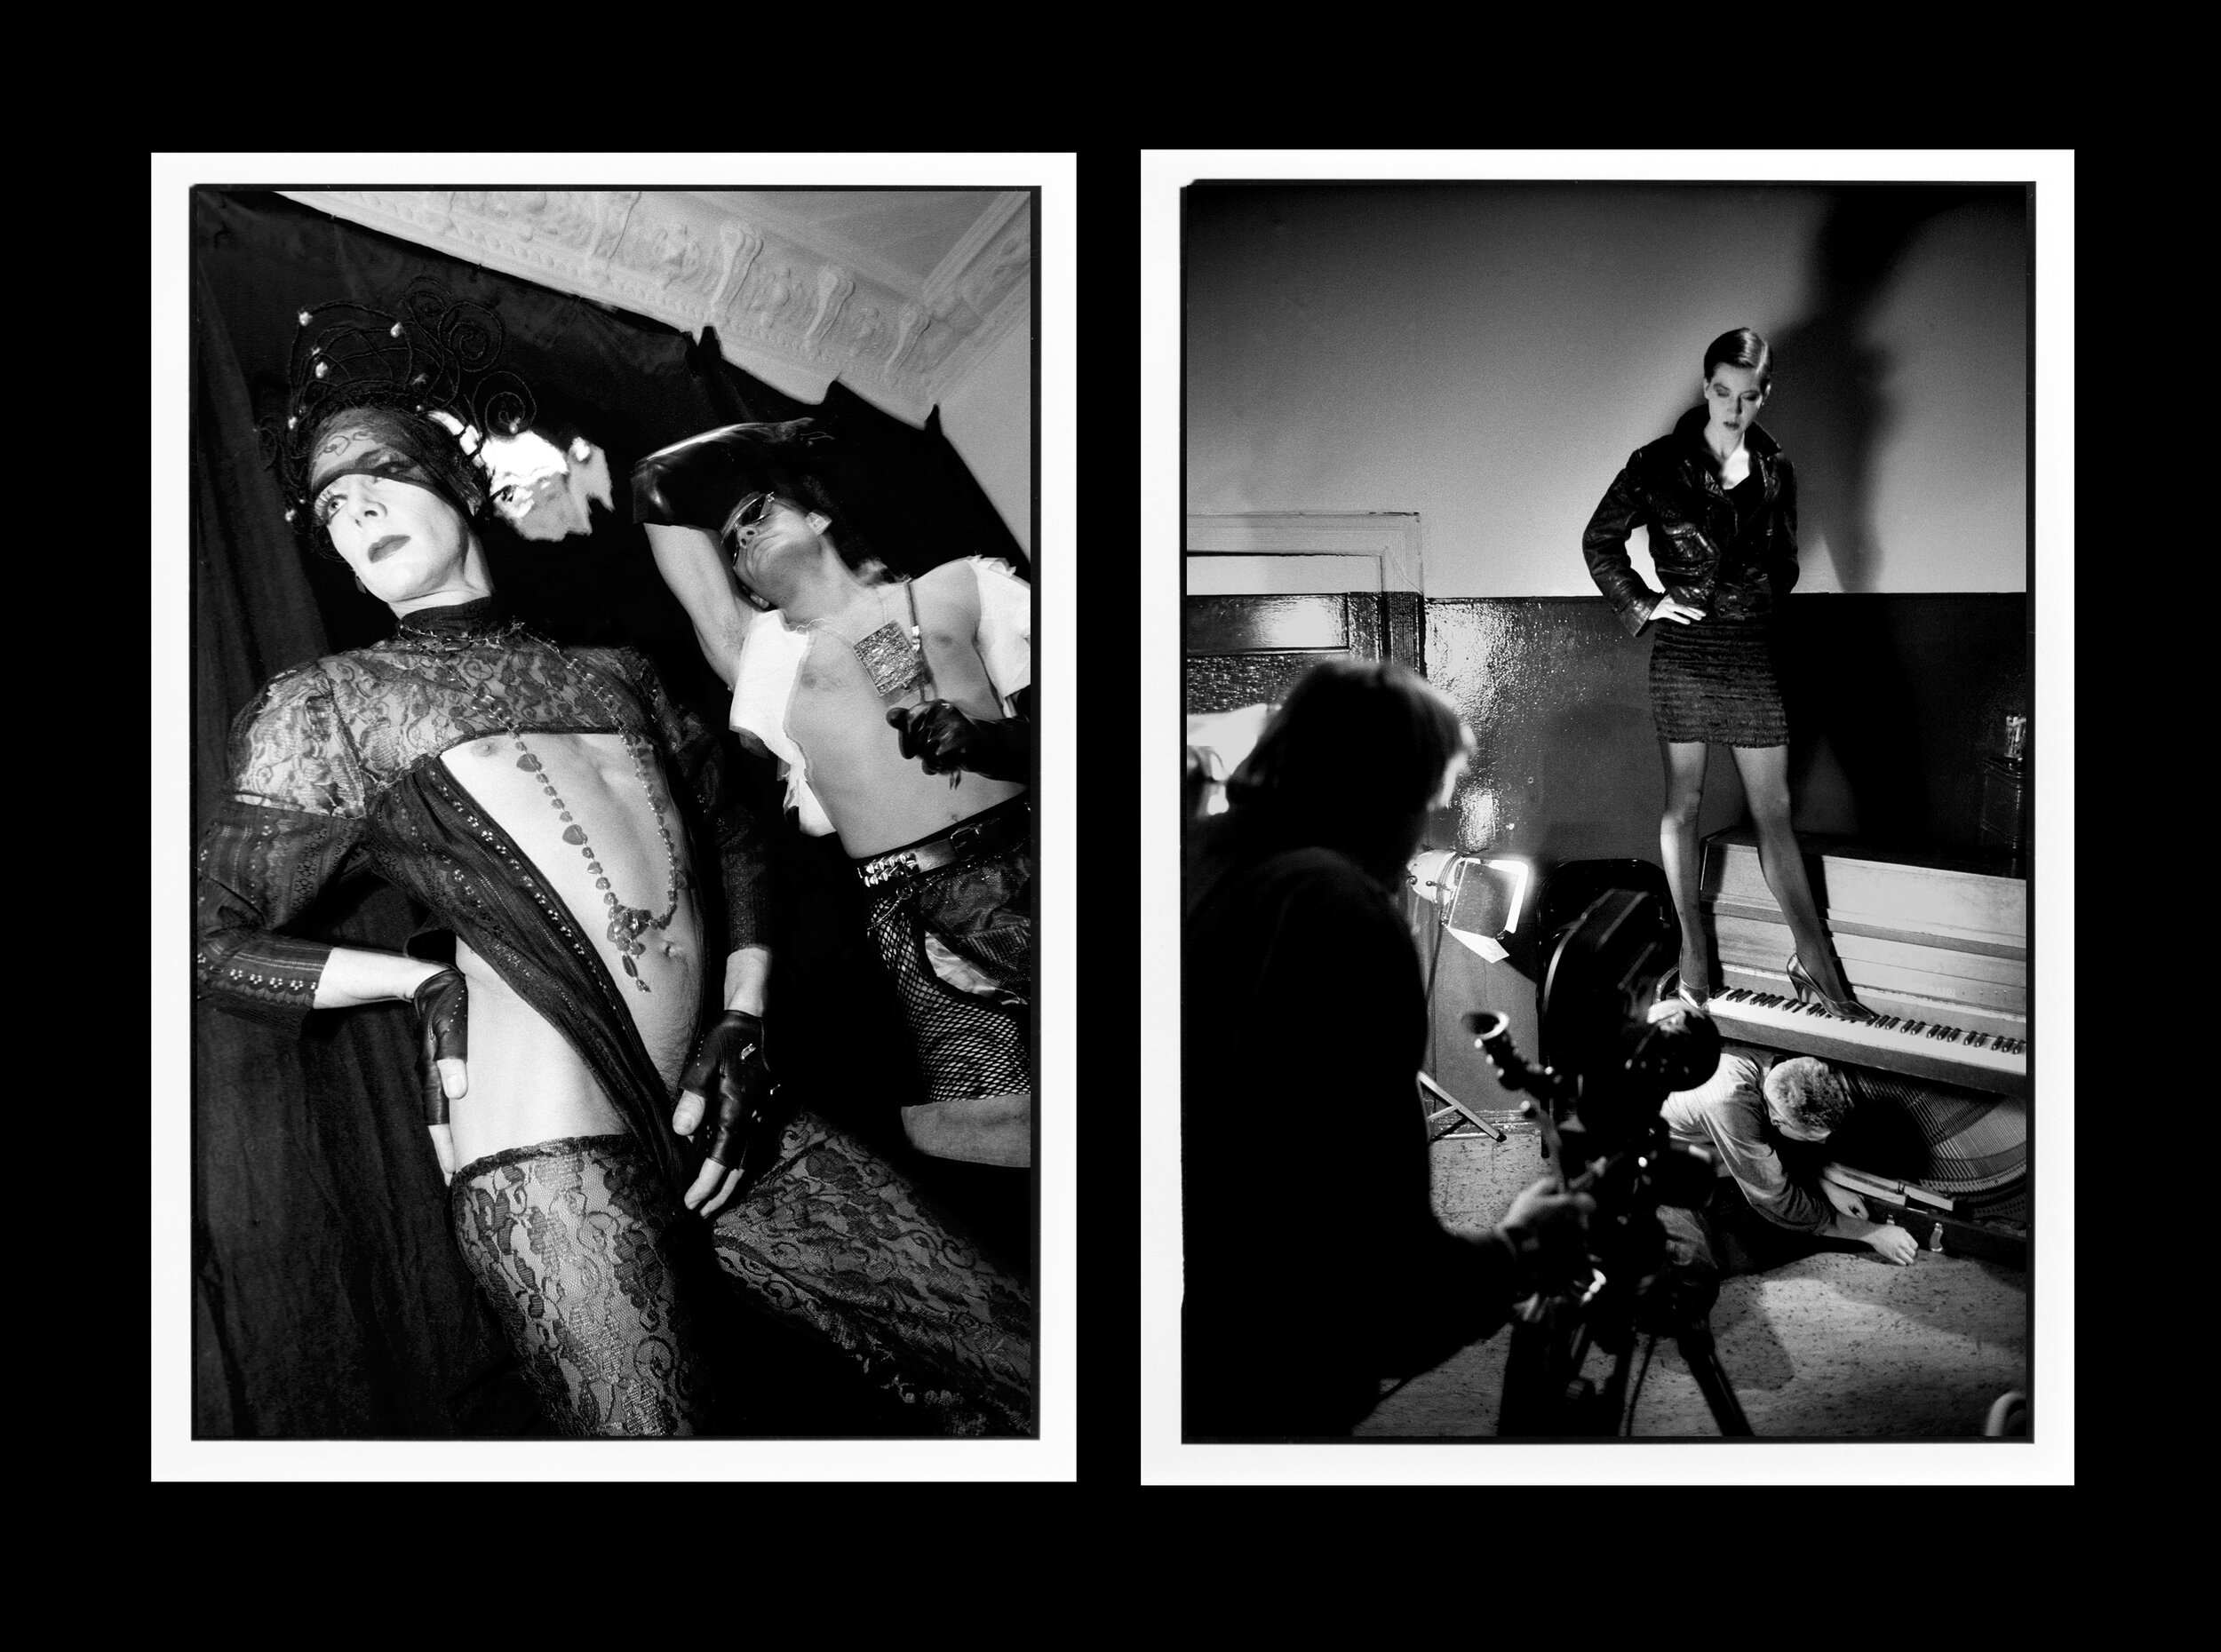  (L) Underground queer fashion show hosted by designer/performer Bev Stroganoff at the Loulou Lasard gallery in East Berlin.   (R) Behind the scenes of a promotional film to entice Westerners to come to The Sophien Club, a new hip club in Berlin's ea